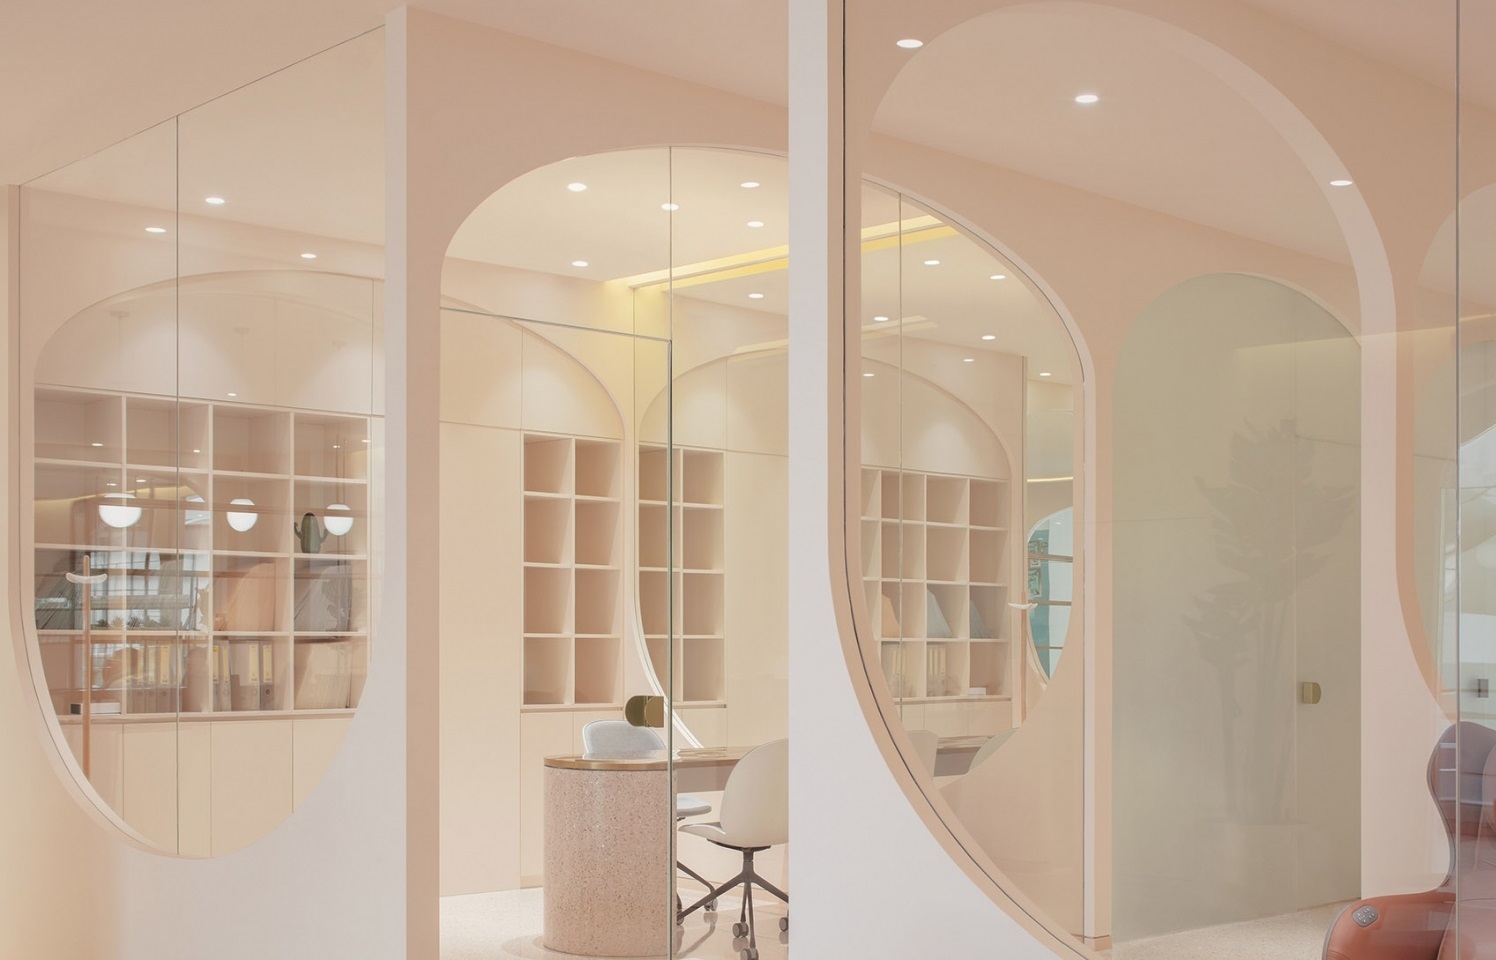 Reception design of Narcissus Beauty Chain Store